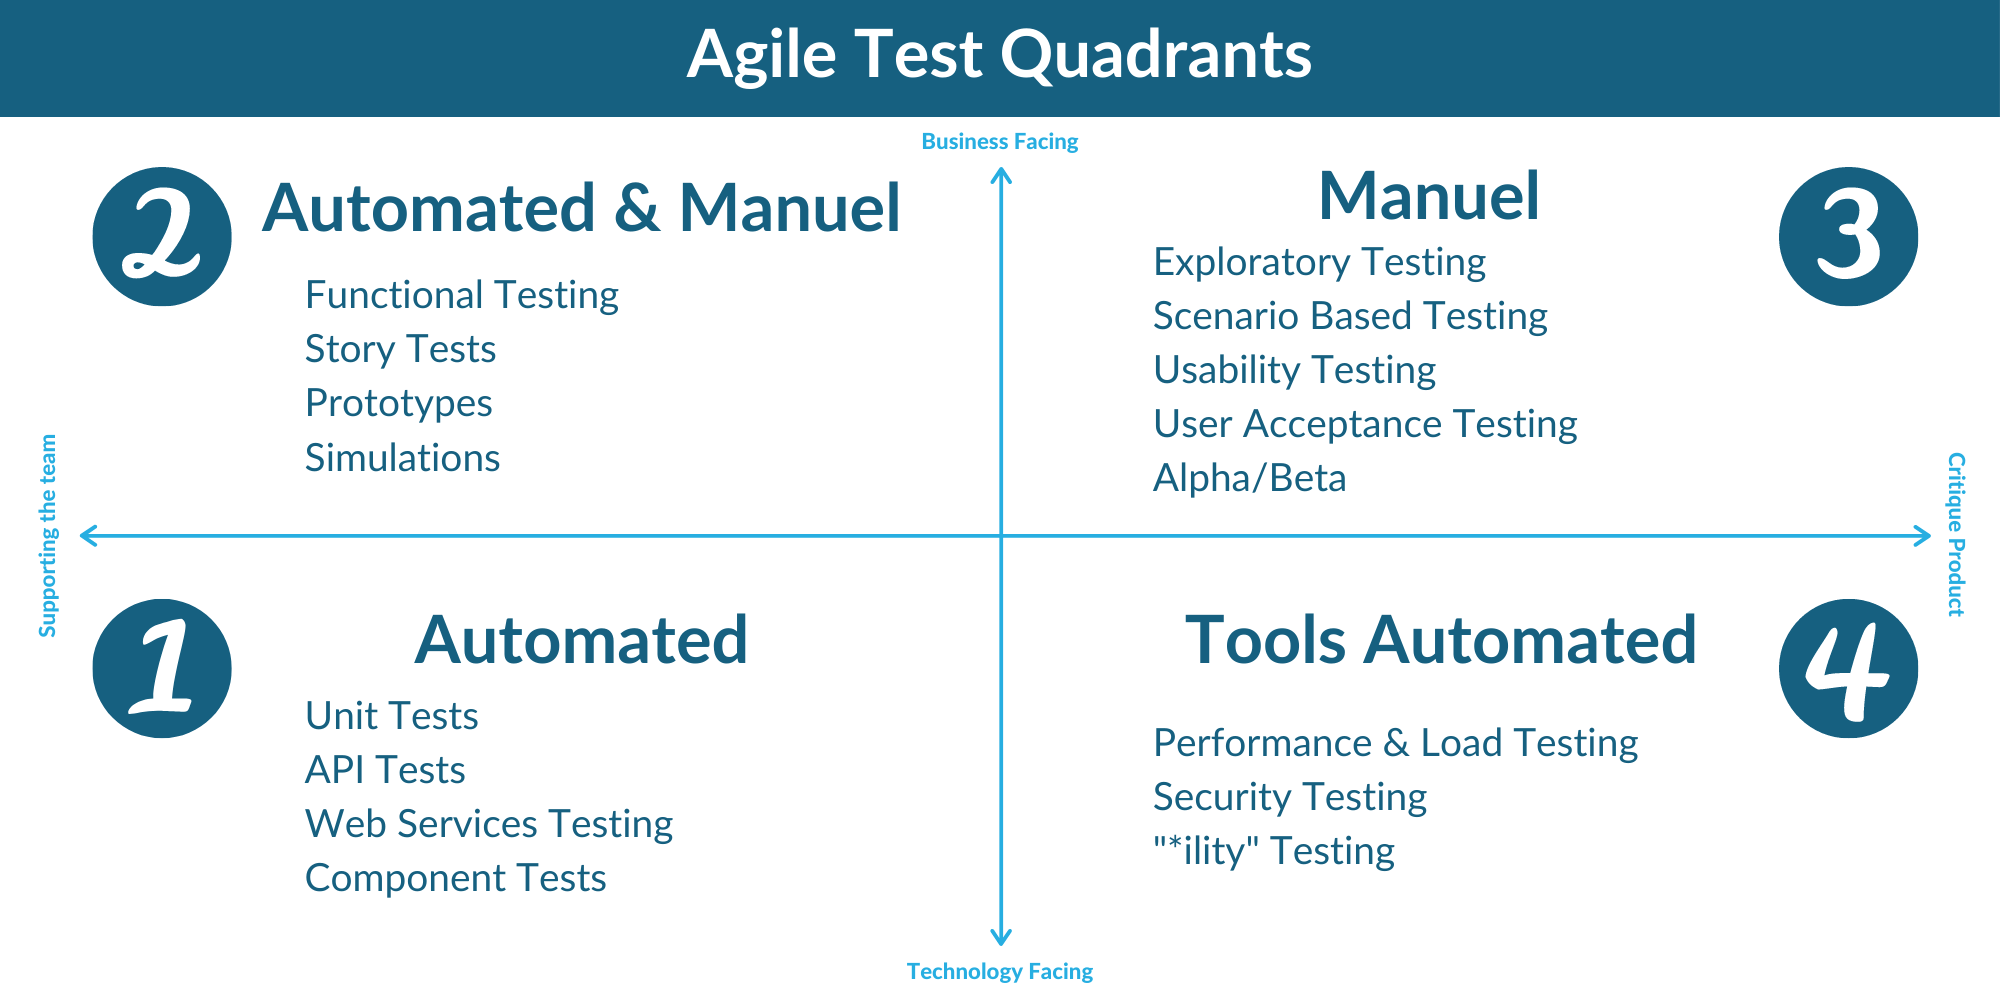 Agile Test Quadrants graph shows where manual and automation testing types fall within the agile quadrants to enable agile delivery. The graph is divided down the middle with a vertical axis. At the top, the axis is labeled “Business Facing,” and “Technology Facing” at the bottom. A horizontal axis also runs through the middle of the graph. This axis is labeled “Supporting the team” on the left and “Critique Product on the Right.” In the bottom left corner (in the technology facing, supporting the team quadrant), Q1 is labeled “Automated” and includes Unit tests, API tests, Web Services testing, component testing. Moving clockwise, Q2 ( the business facing, supporting the team quadrant) is labeled “Automated & Manuel” and included functional testing, story tests, prototypes, simulations. Q3 (business facing, critique product) is called “Manual” and includes exploratory testing, scenerio based testing, usability testing, user acceptance testing, and alpha/beta. Q4 (technology facing, critique product) is labeled “Tools Automated” and includes performance and load testing, security testing, and *ility testing.